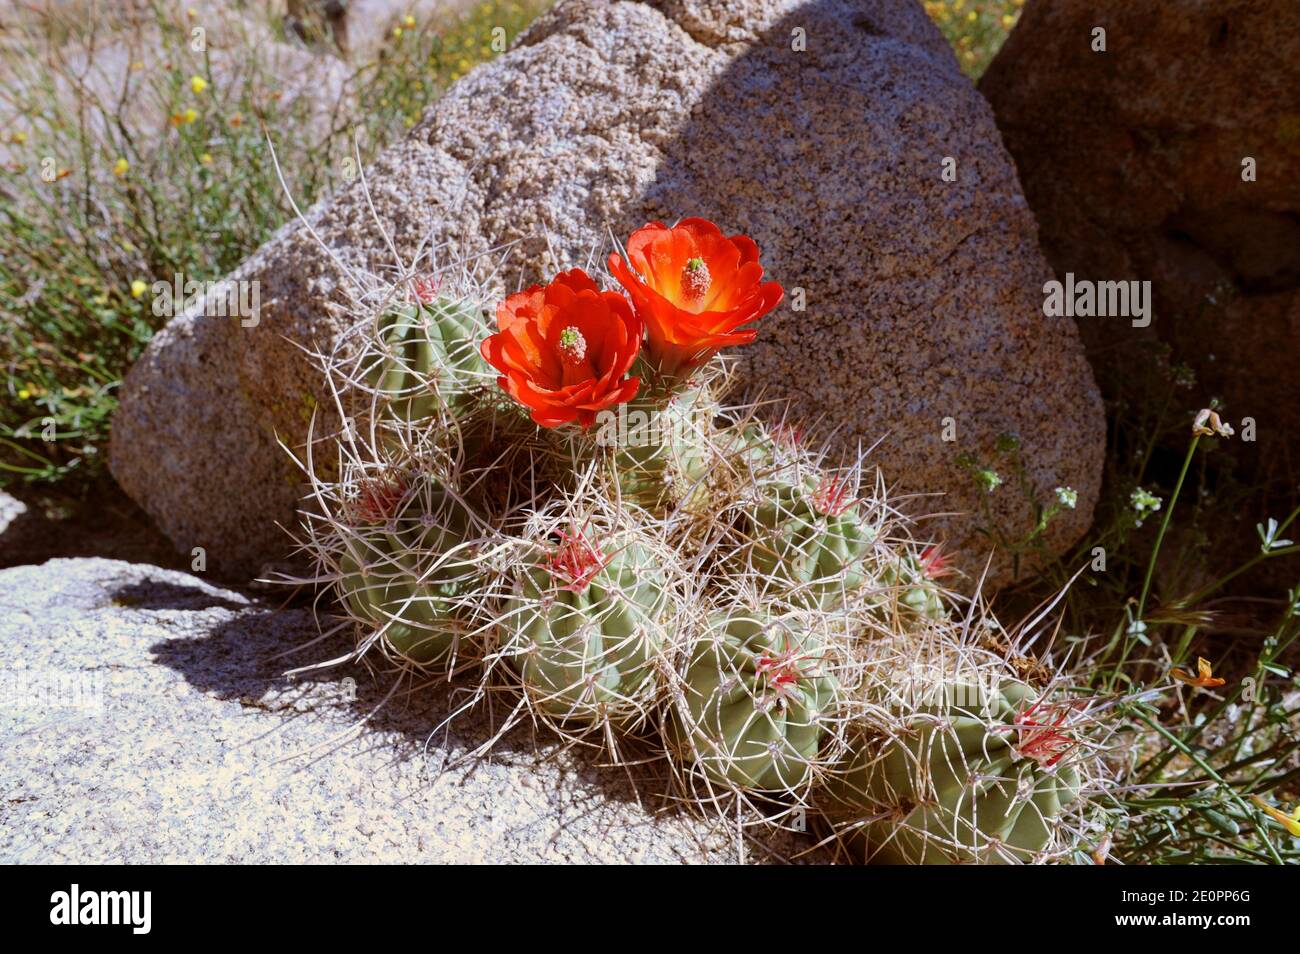 Kingcup cactus or Mojave mound cactus (Echinocereus triglochidiatus) is a cactus native to Southwestern USA and Northern Mexico. This photo was taken Stock Photo